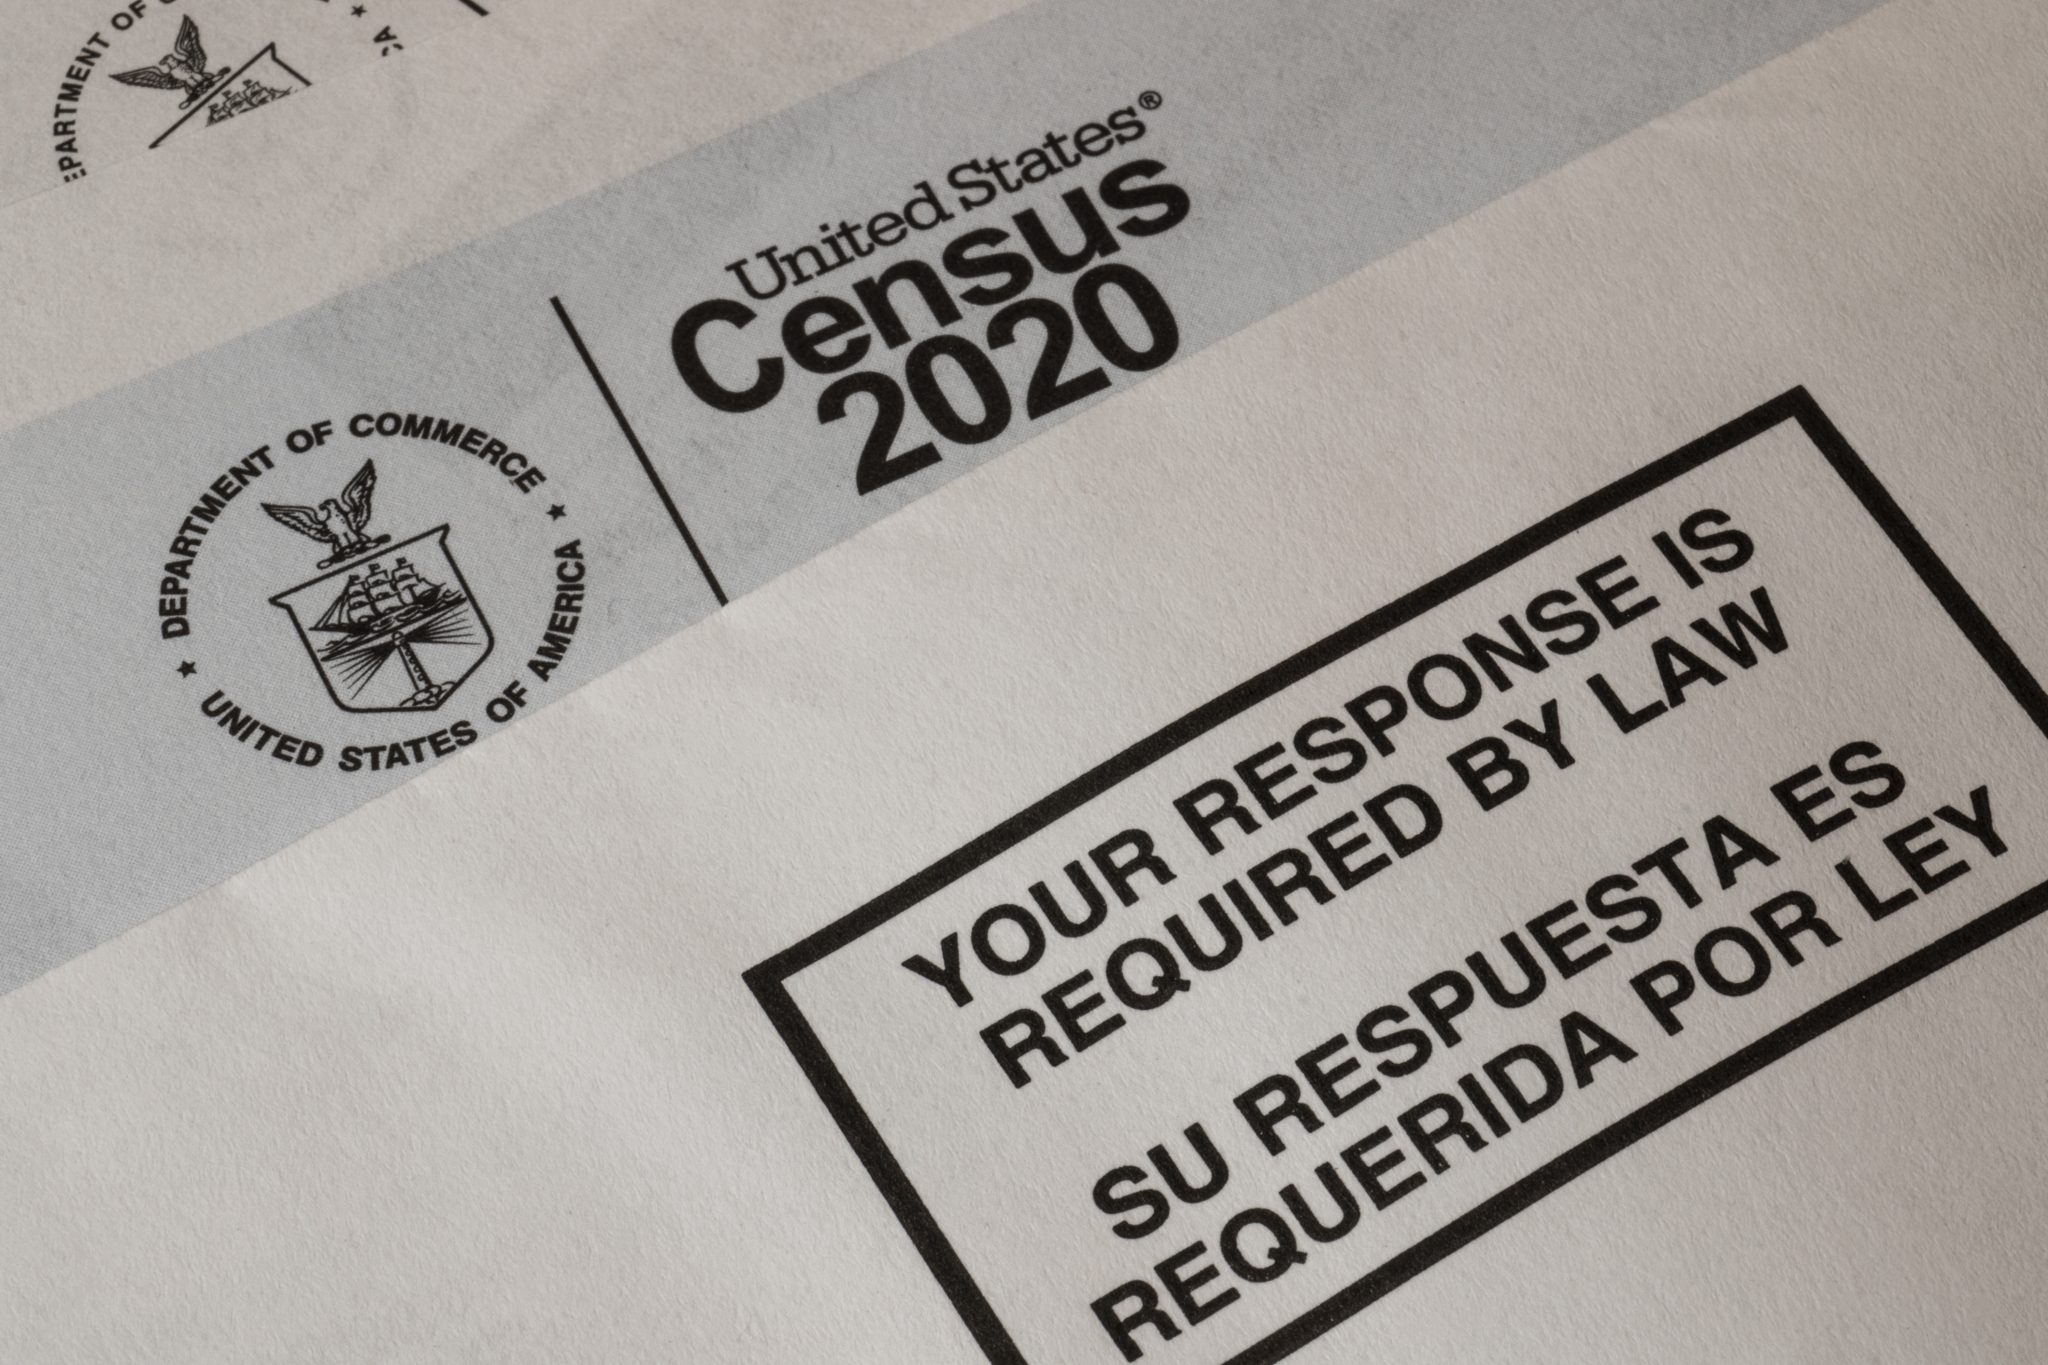 Census 2020 form. The census is the procedure of systematically acquiring and recording information about the members of a given population.